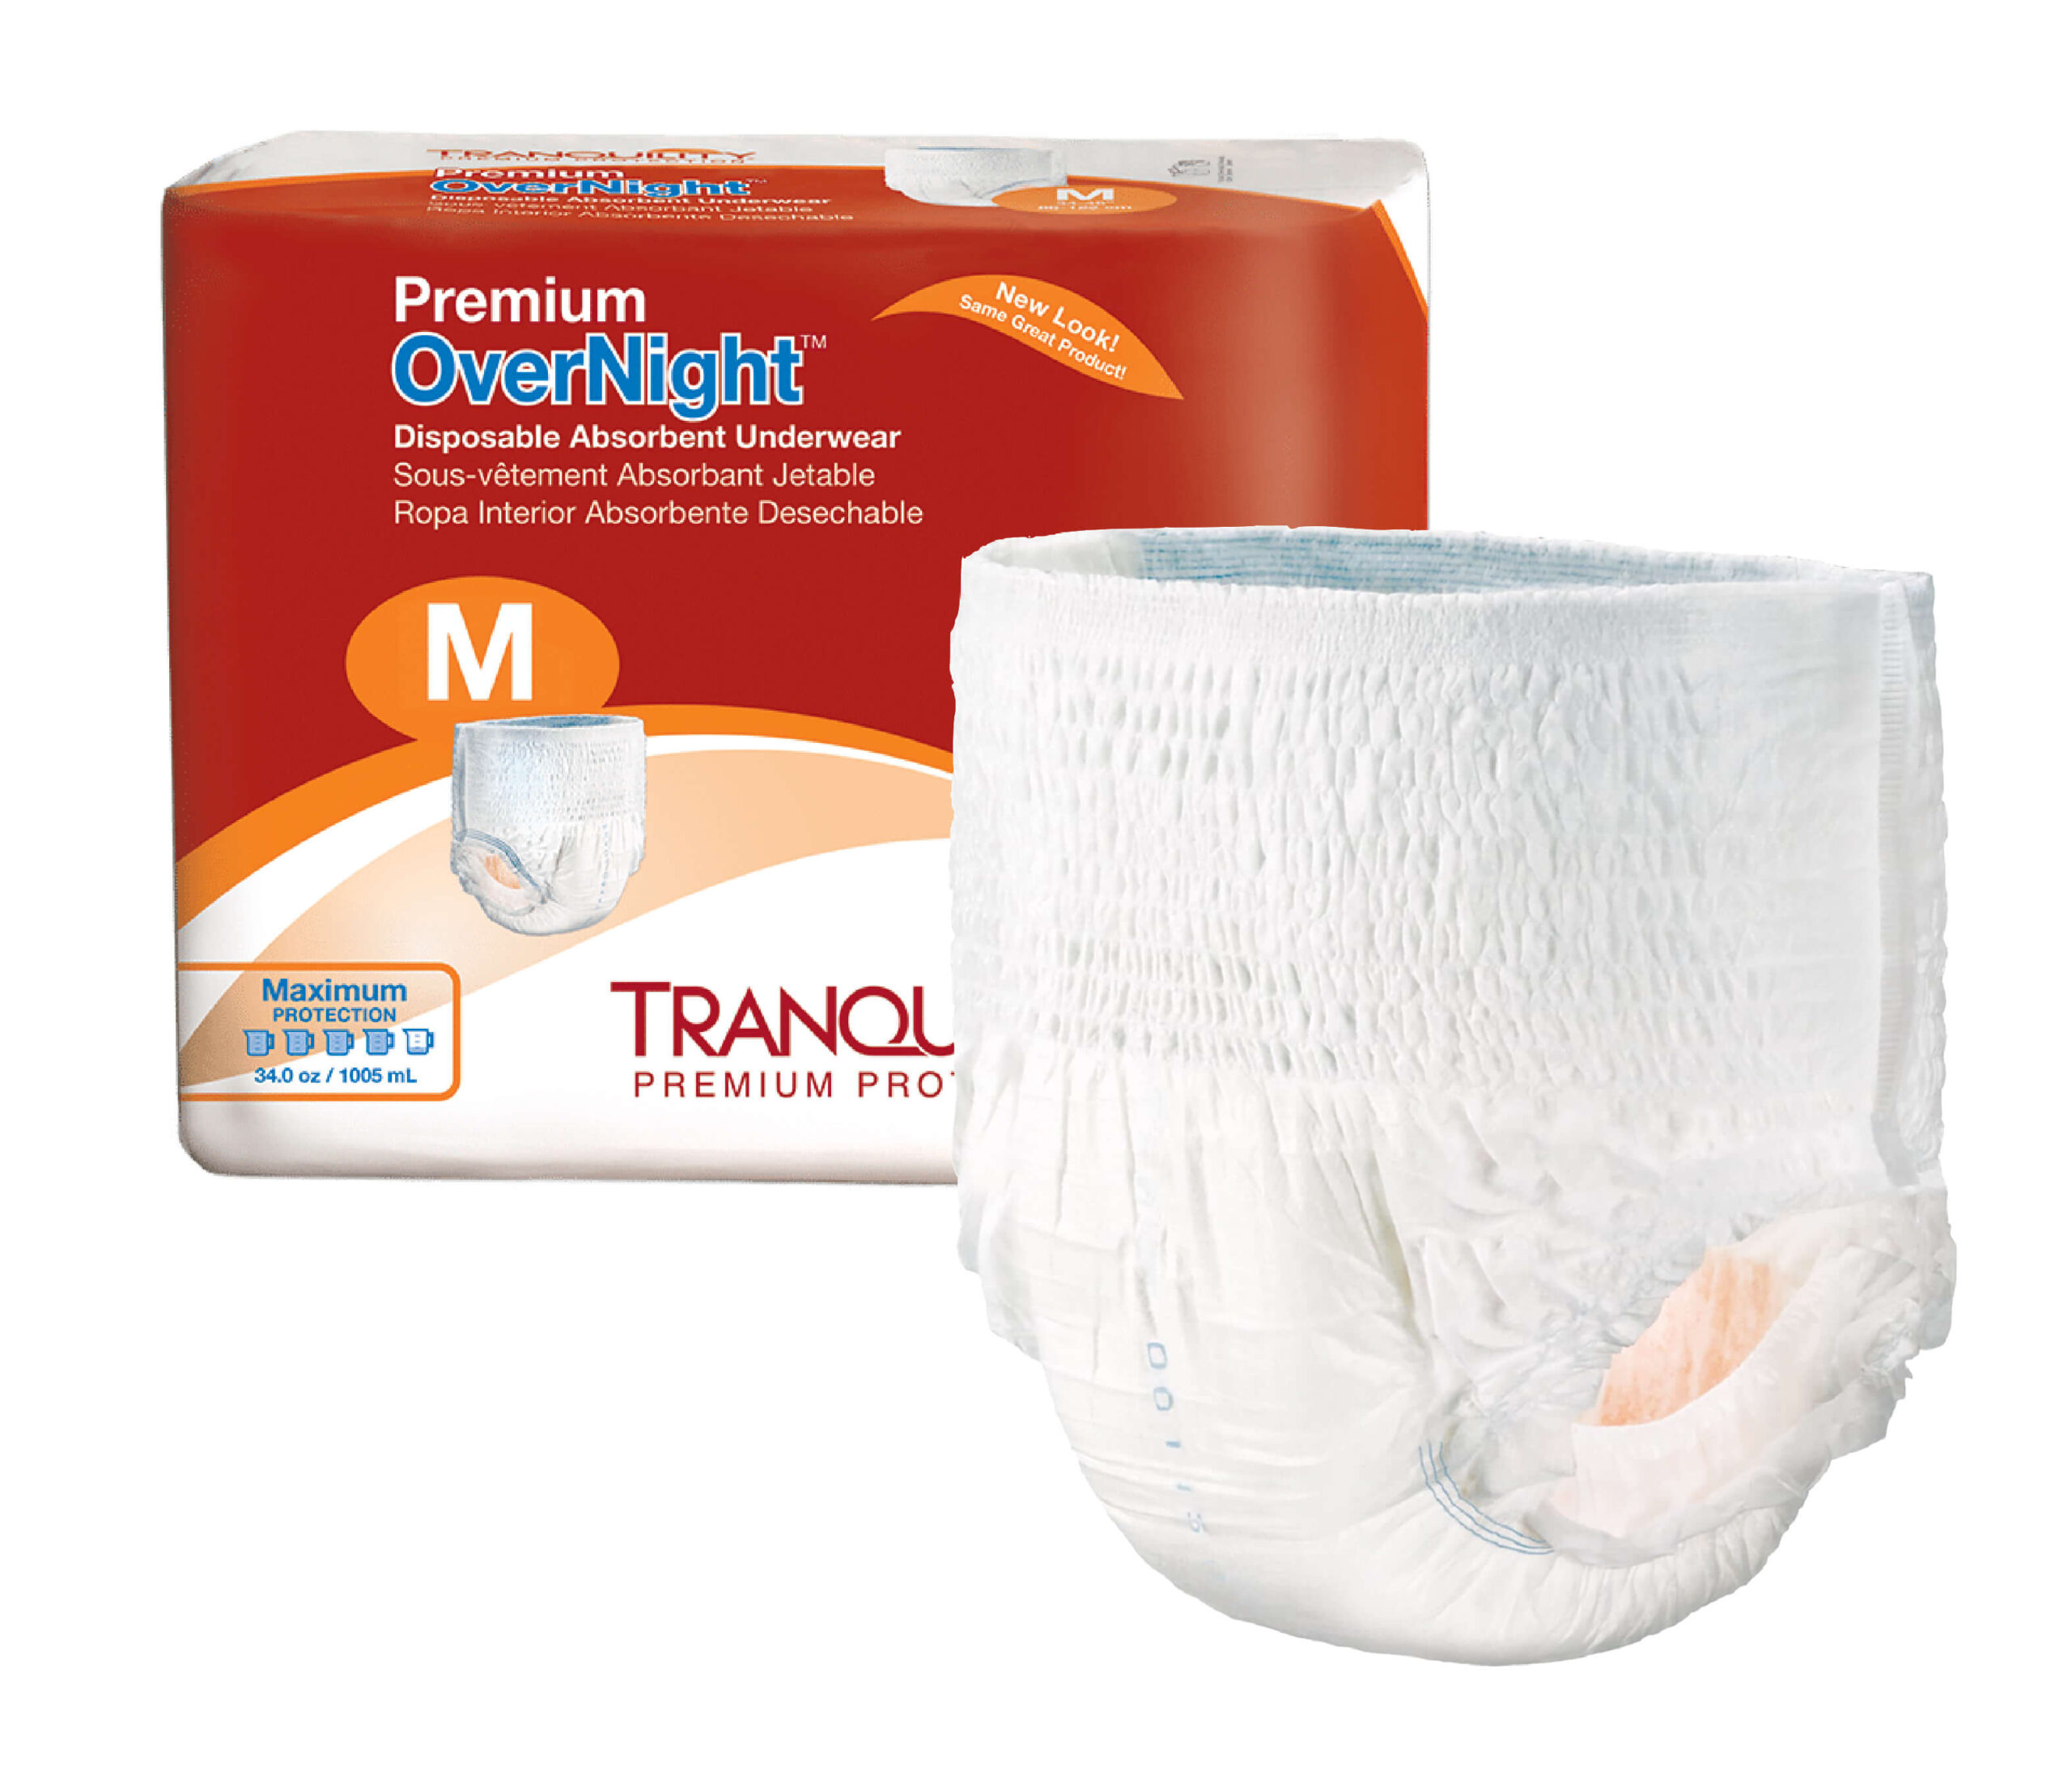 What is The Best Pull-On Diaper for Adults?